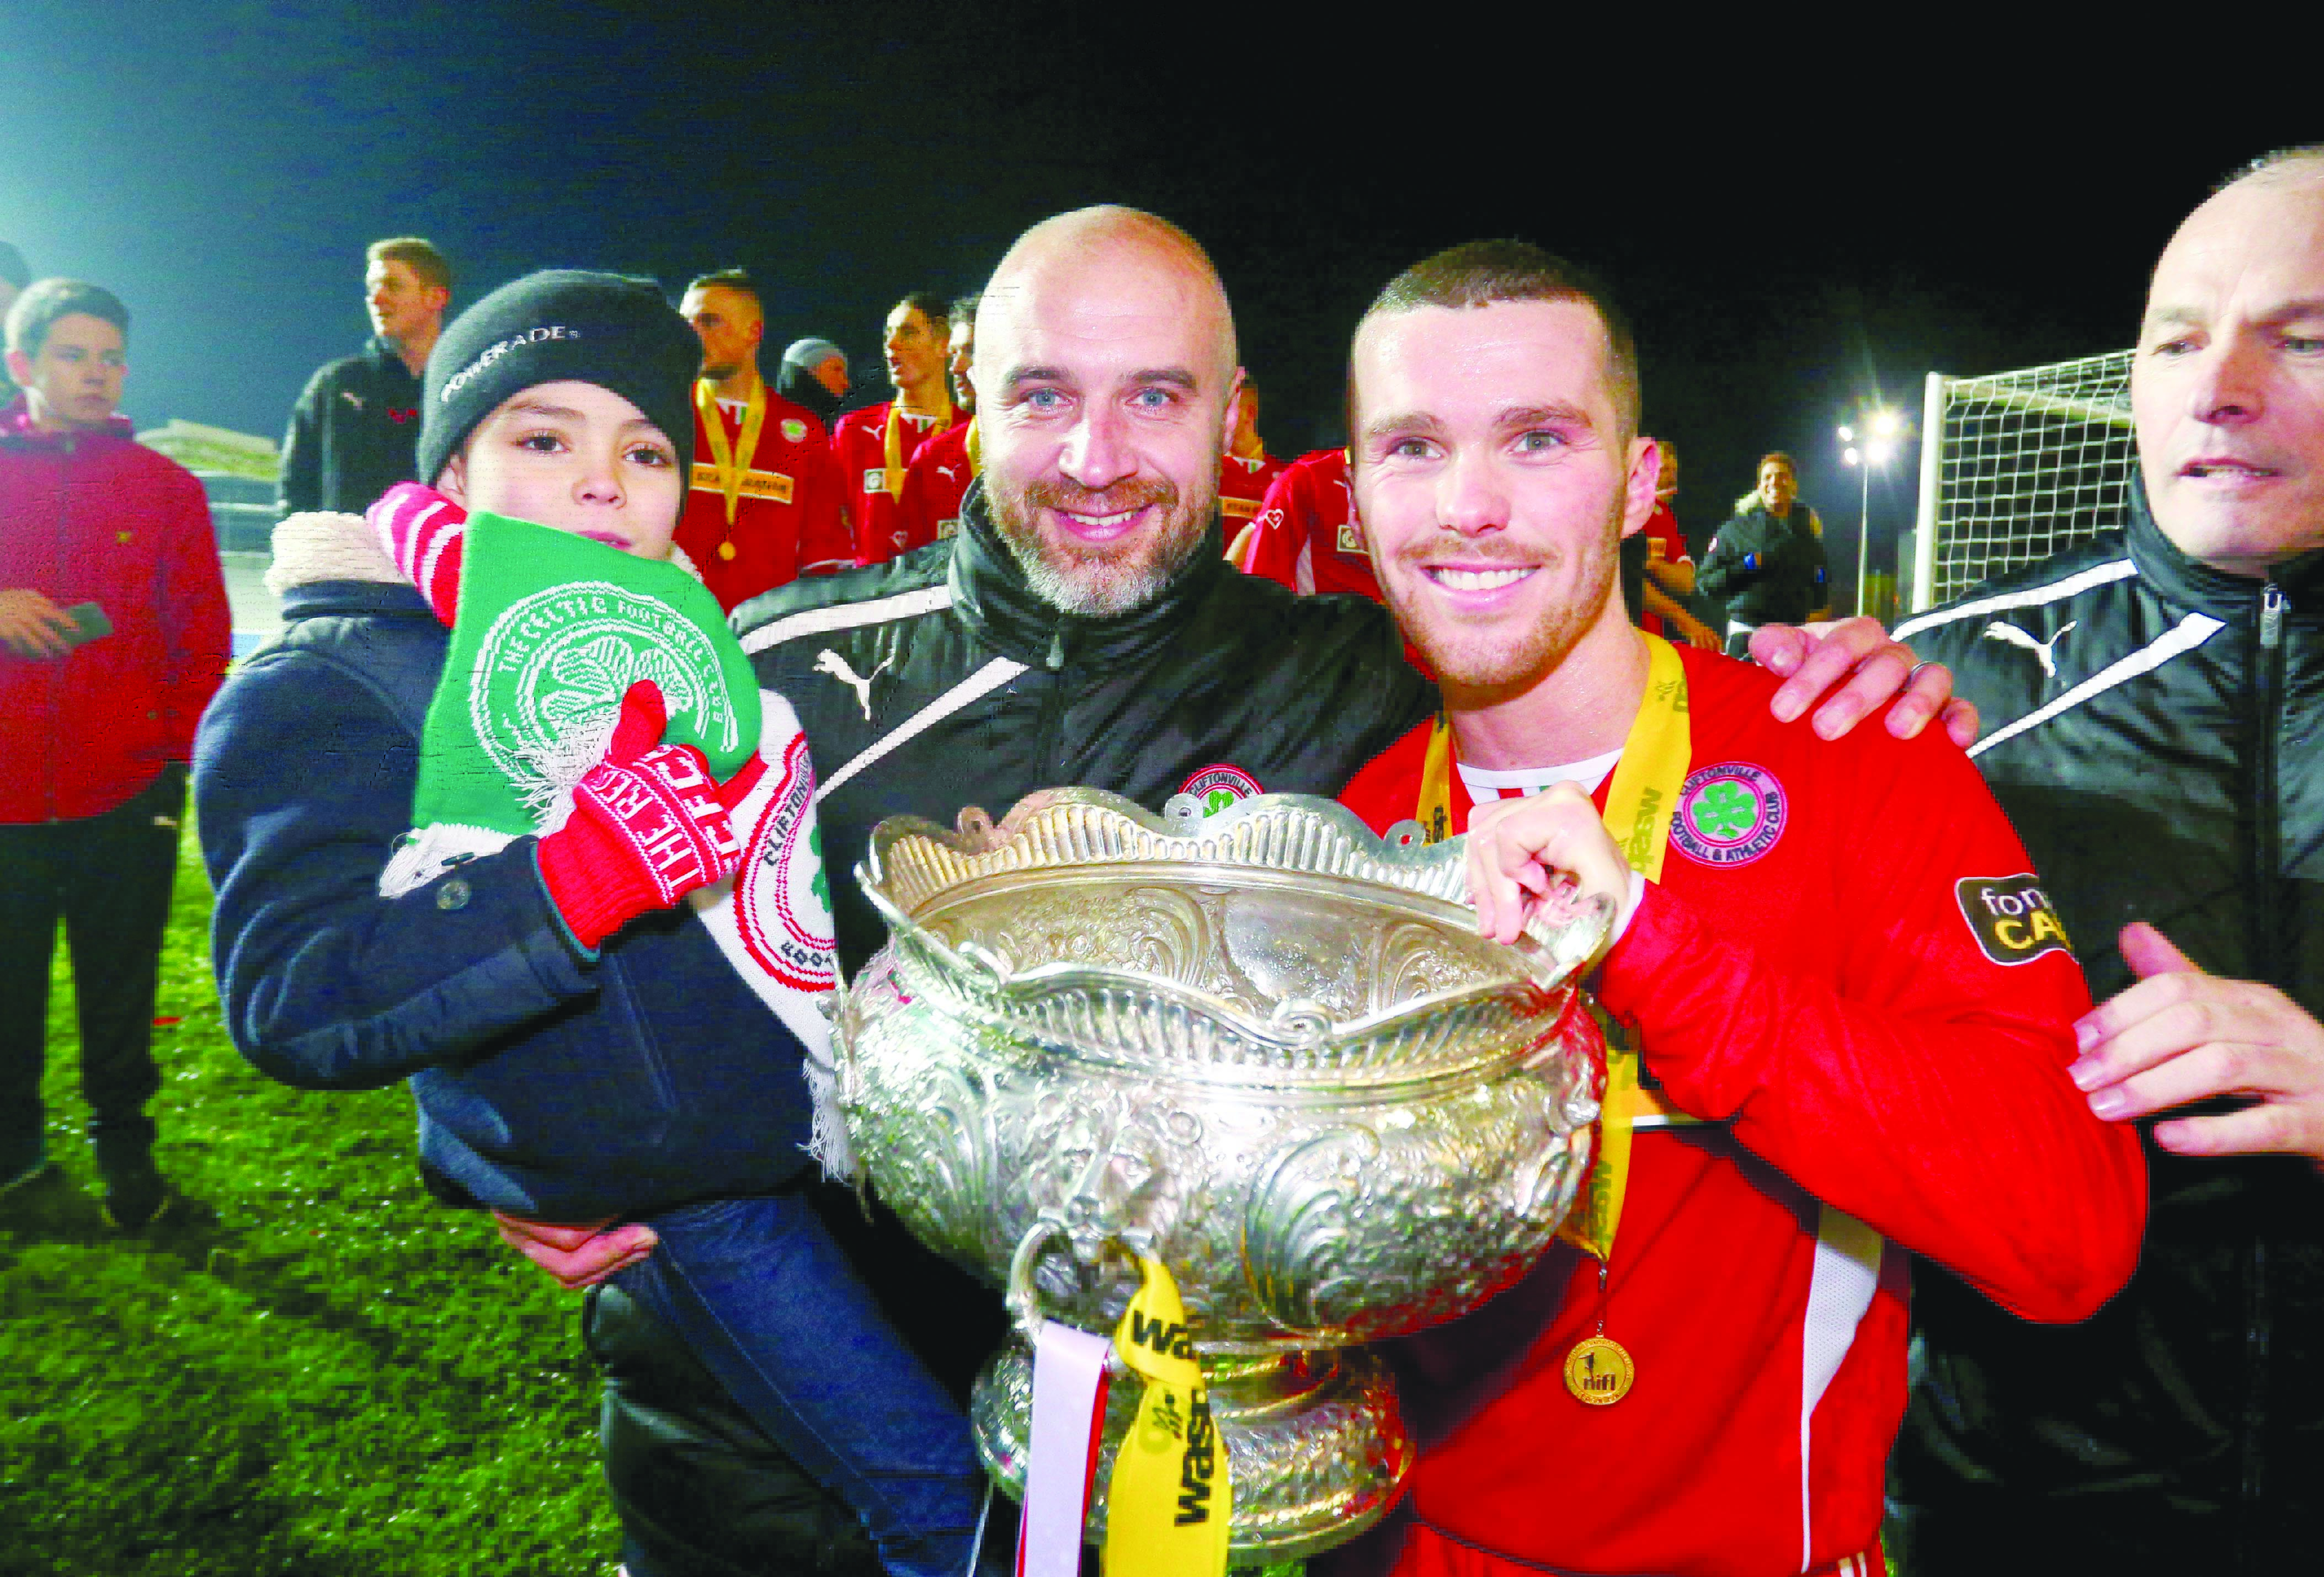 Gerard Lyttle and Martin Donnelly celebrate after last year’s League Cup final. Lyttle is hoping to get his hands back on the cup this Saturday as manager of the Reds\n\nPicture - Kevin Scott / Presseye